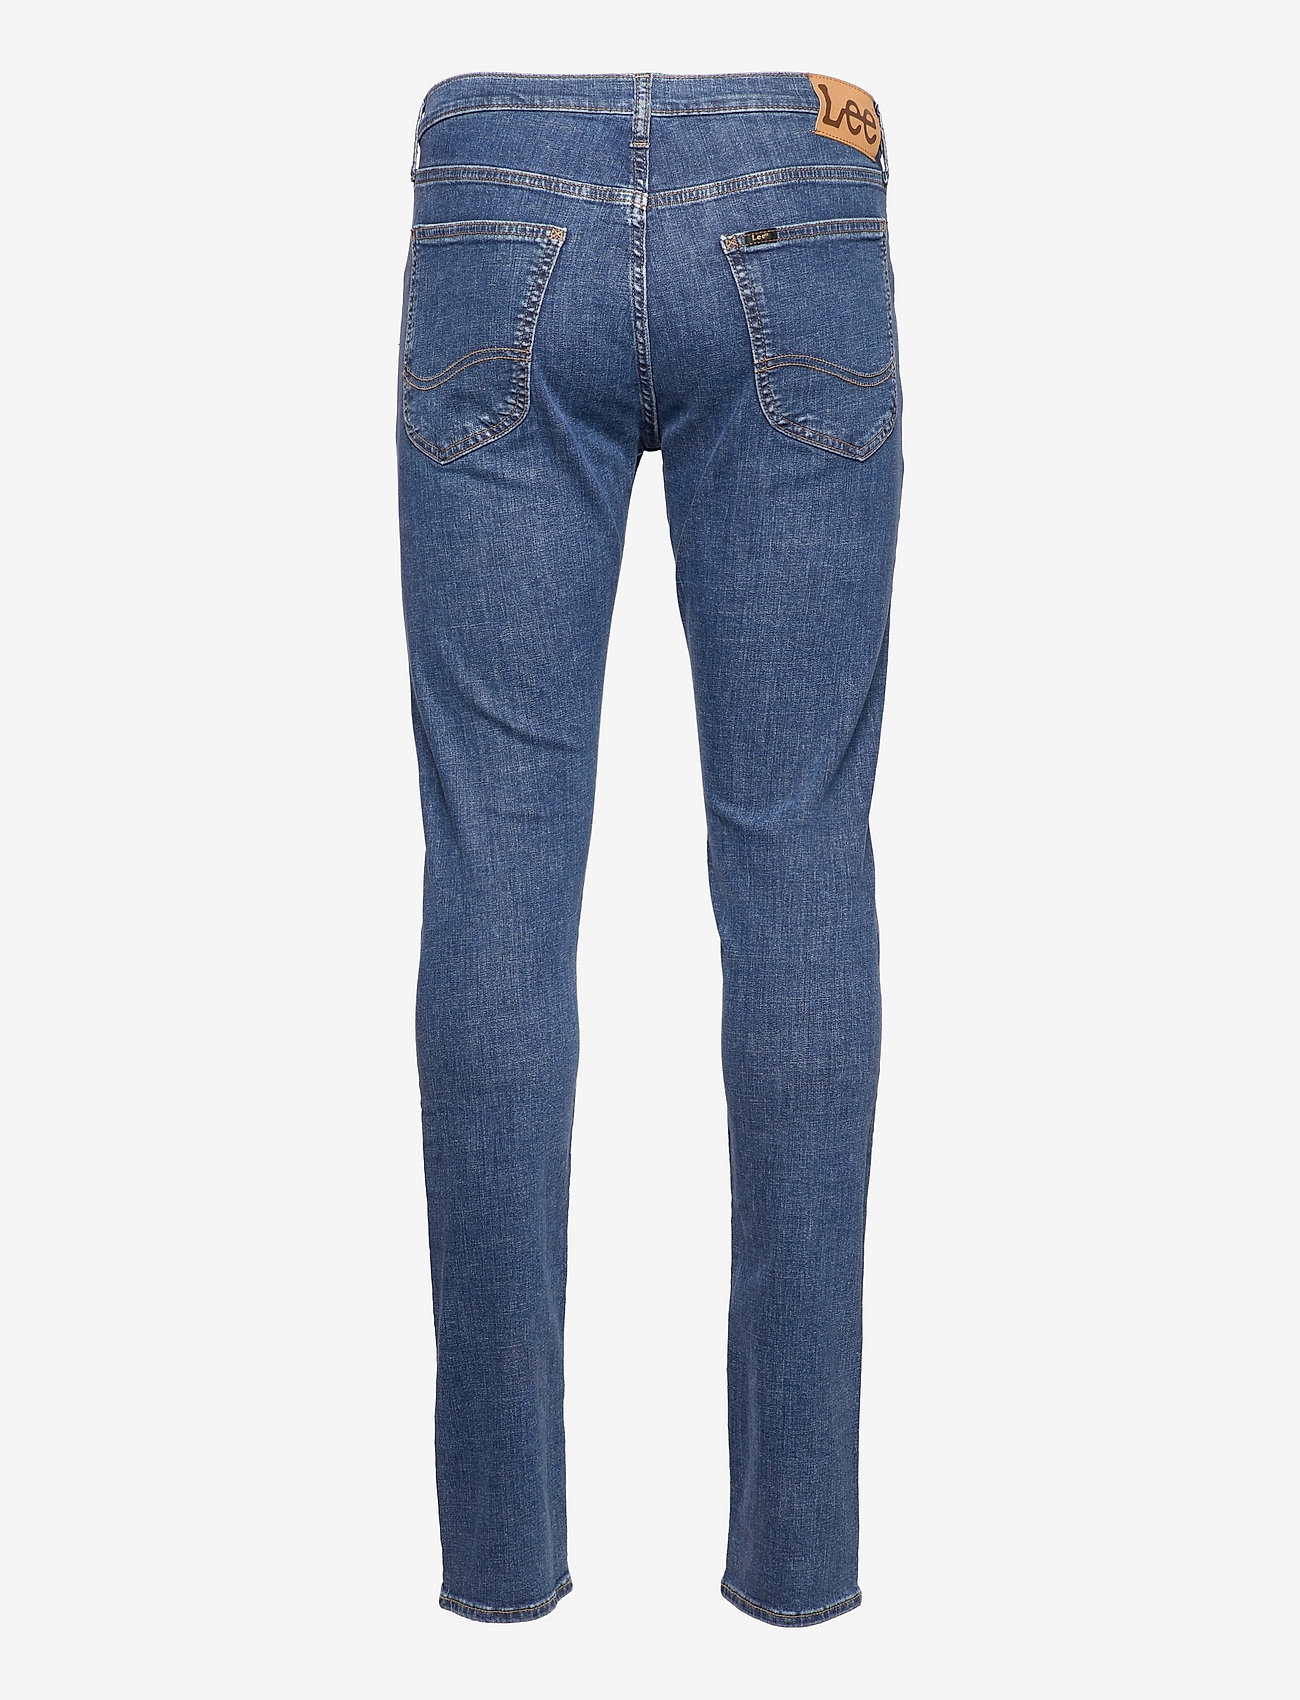 Lee Jeans - LUKE - tapered jeans - mid stone wash - 1